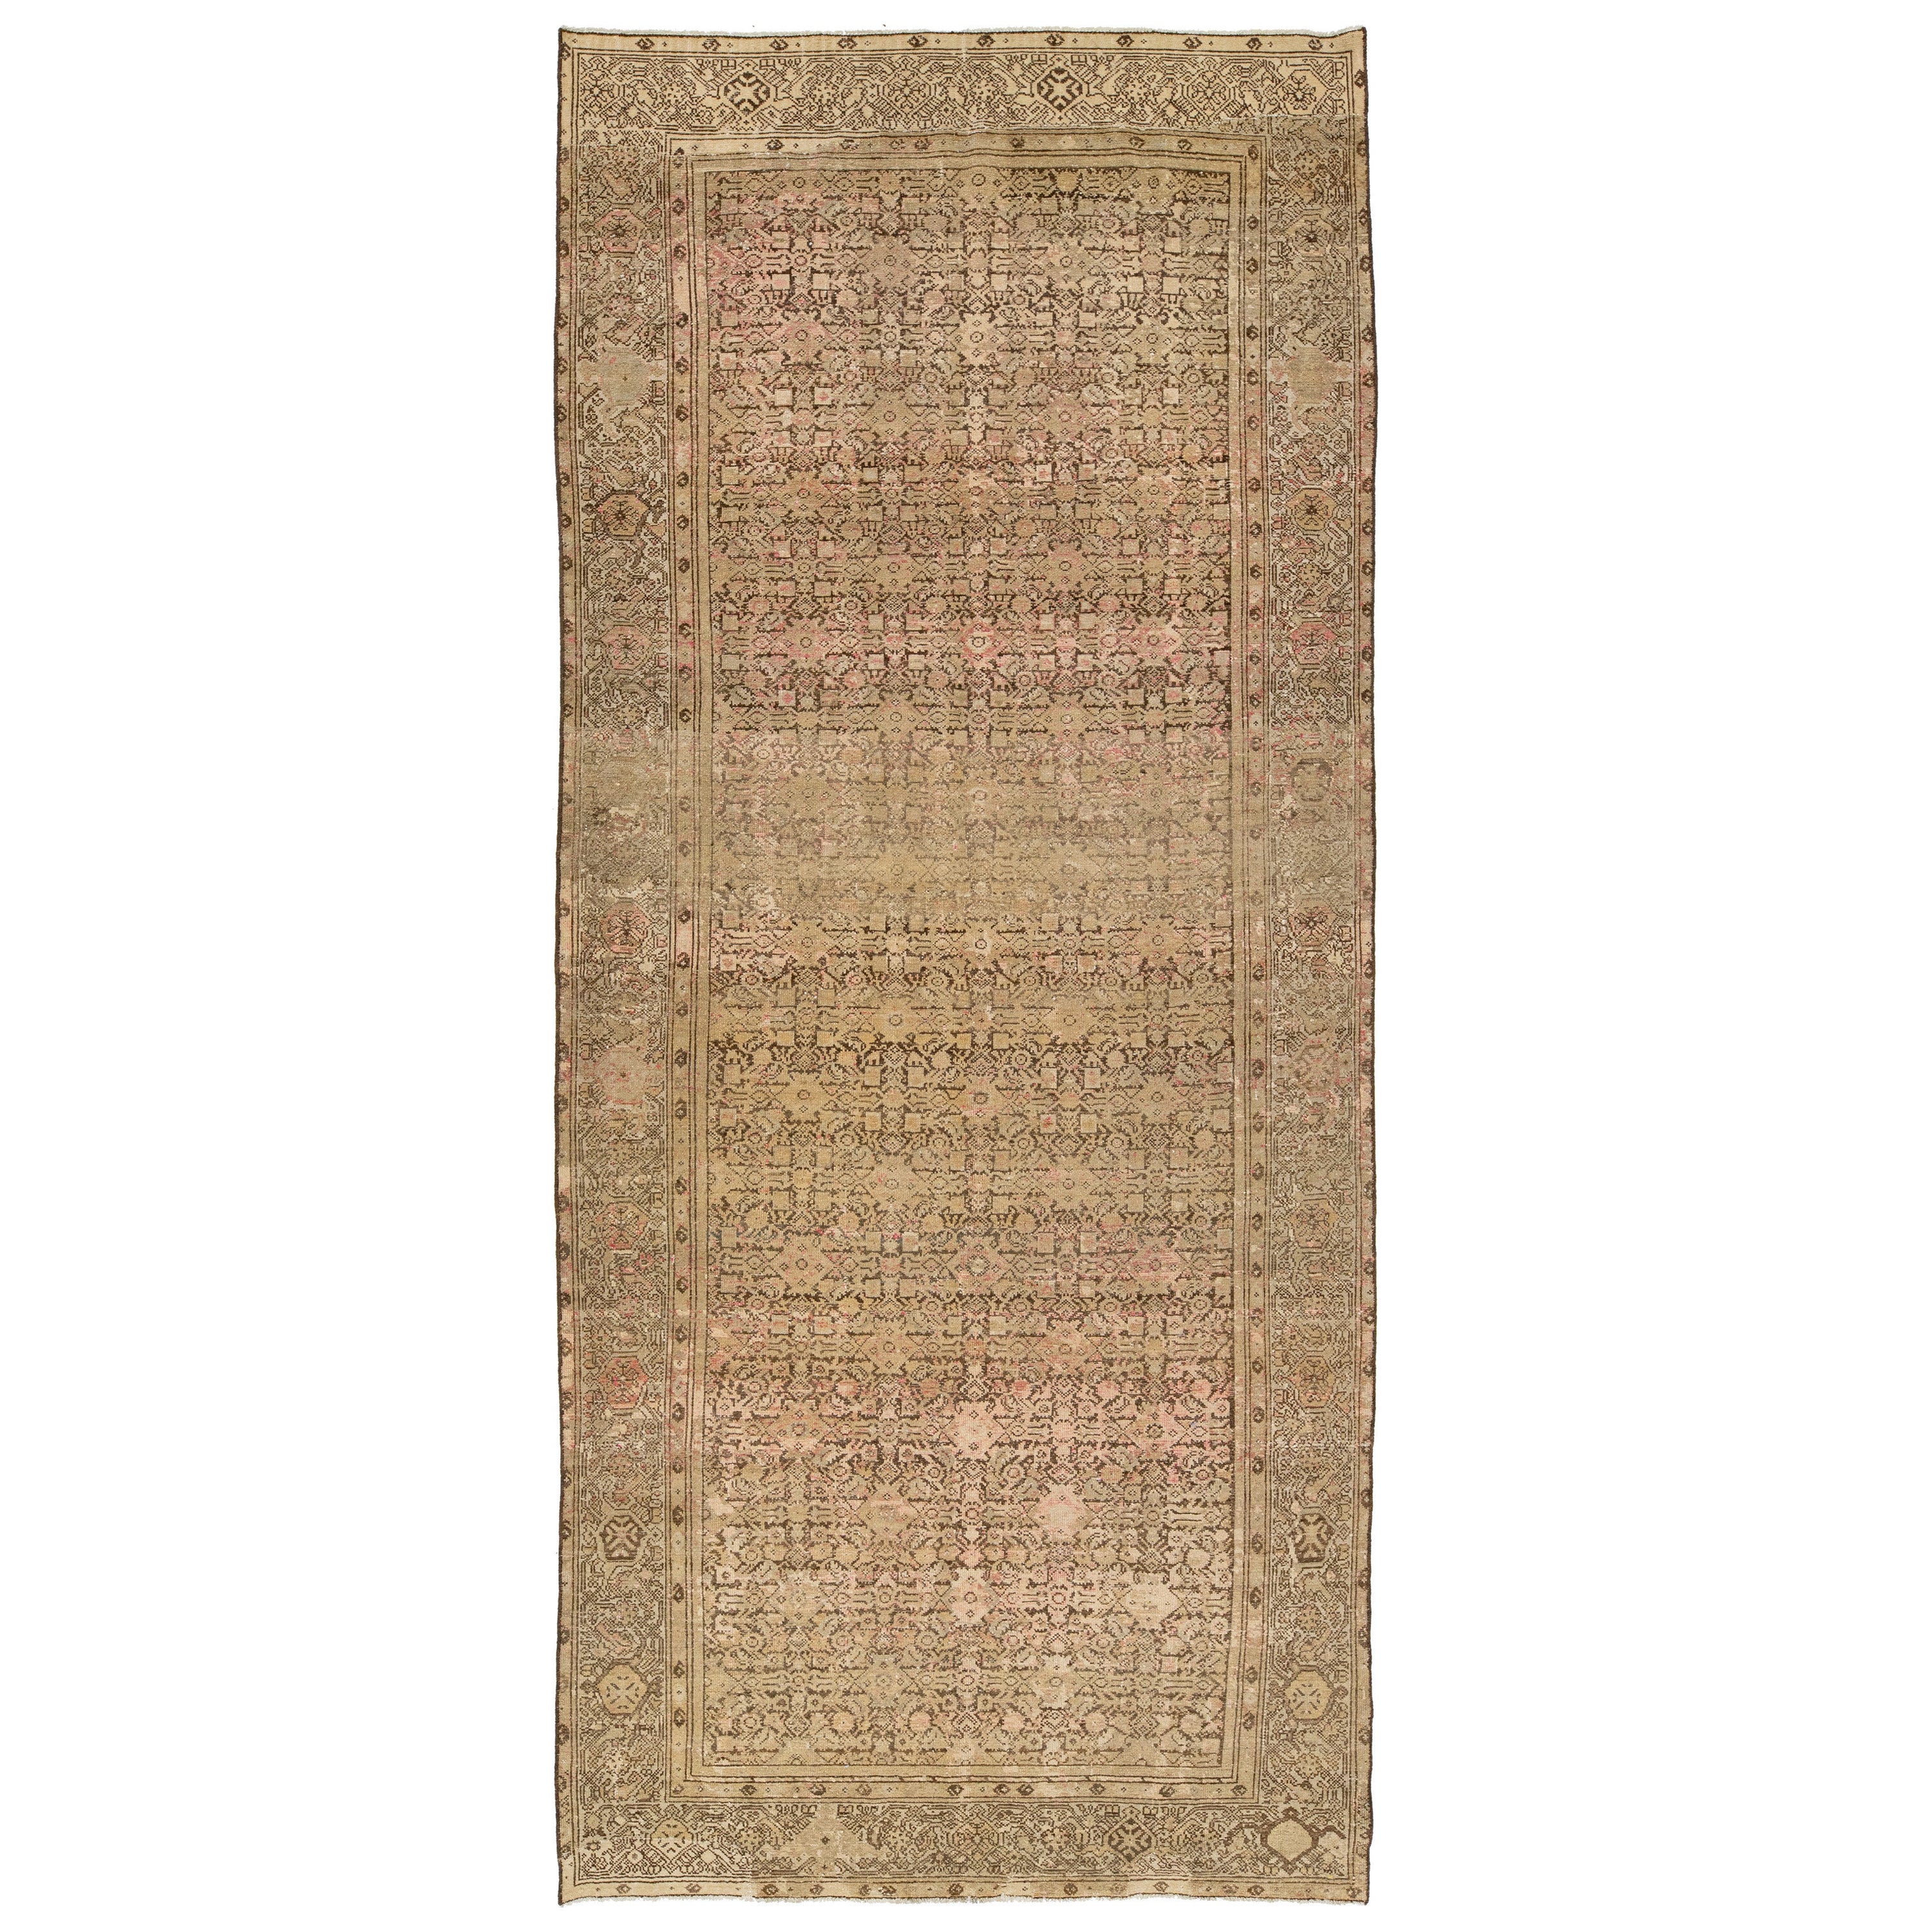 Tan Antique Malayer Wool Rug Handmade Allover Motif For Sale